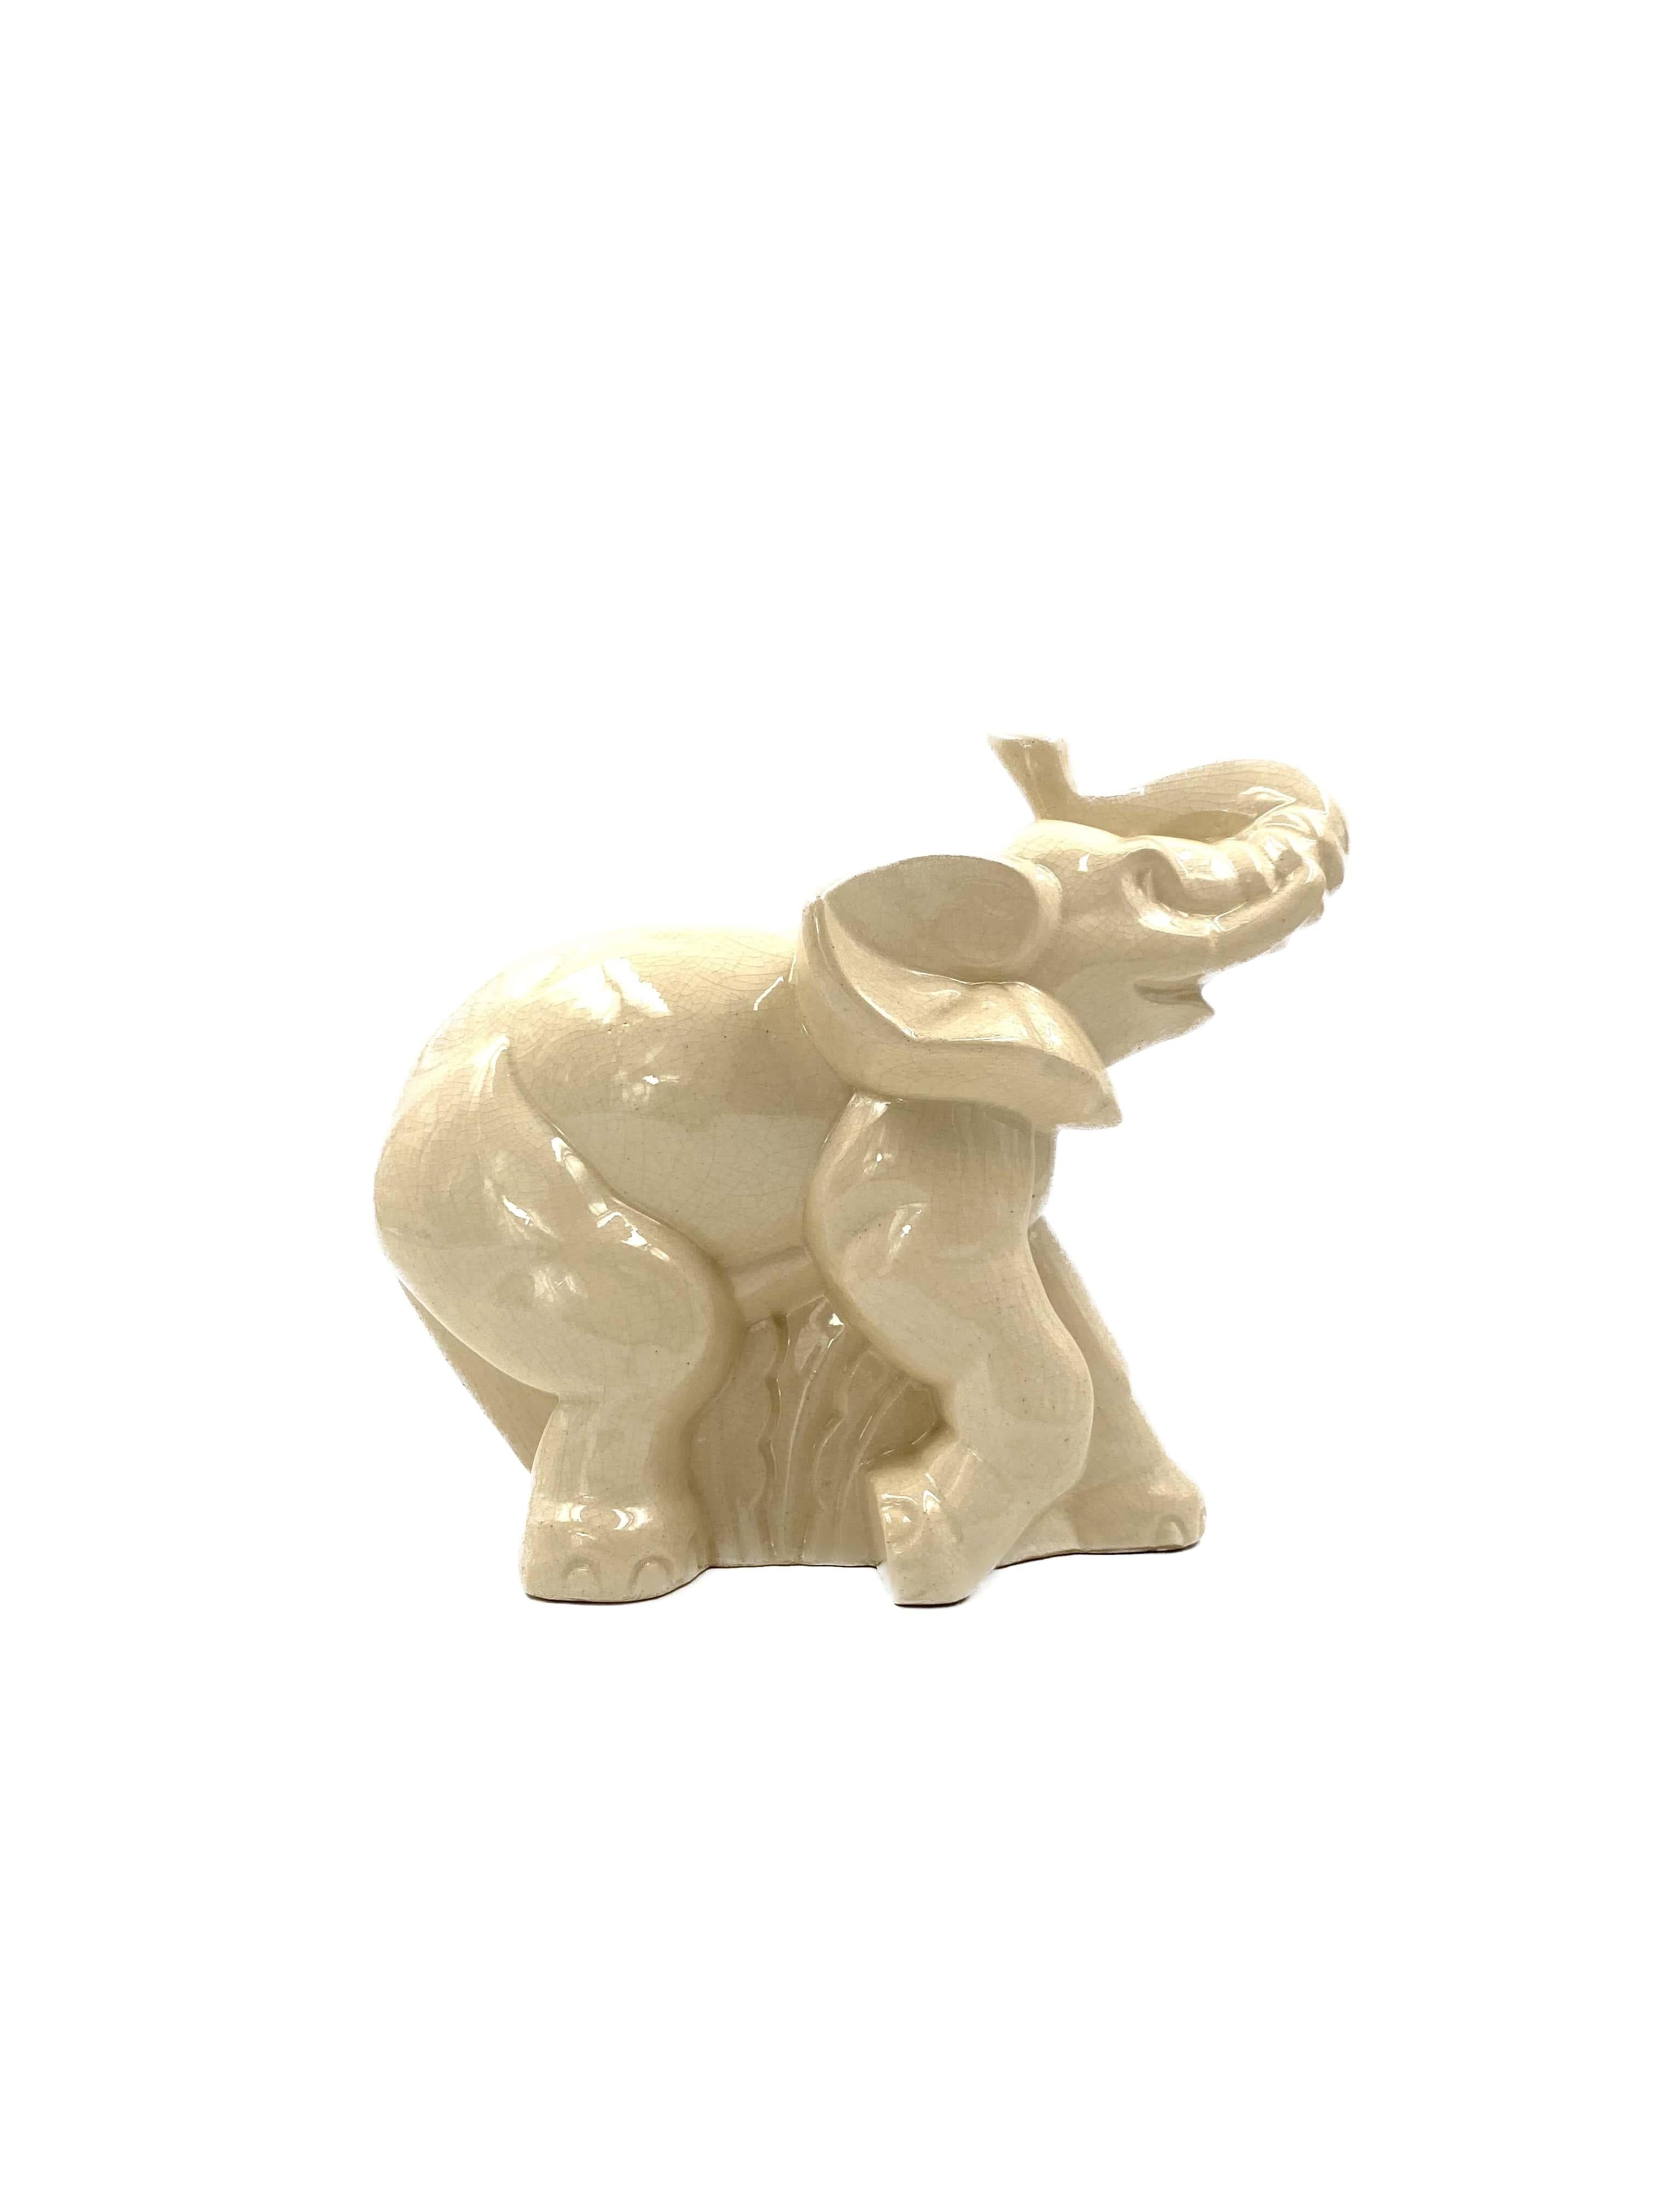 Art Deco elephant sculpture designed by Fontinelle.

Belgium 1940s

cream / ivory craquelé glazed earthenware

Marked on the base with N. 66, there is a mark on the foot, but this can not be read well.

Measures : 29H x 32 x 17